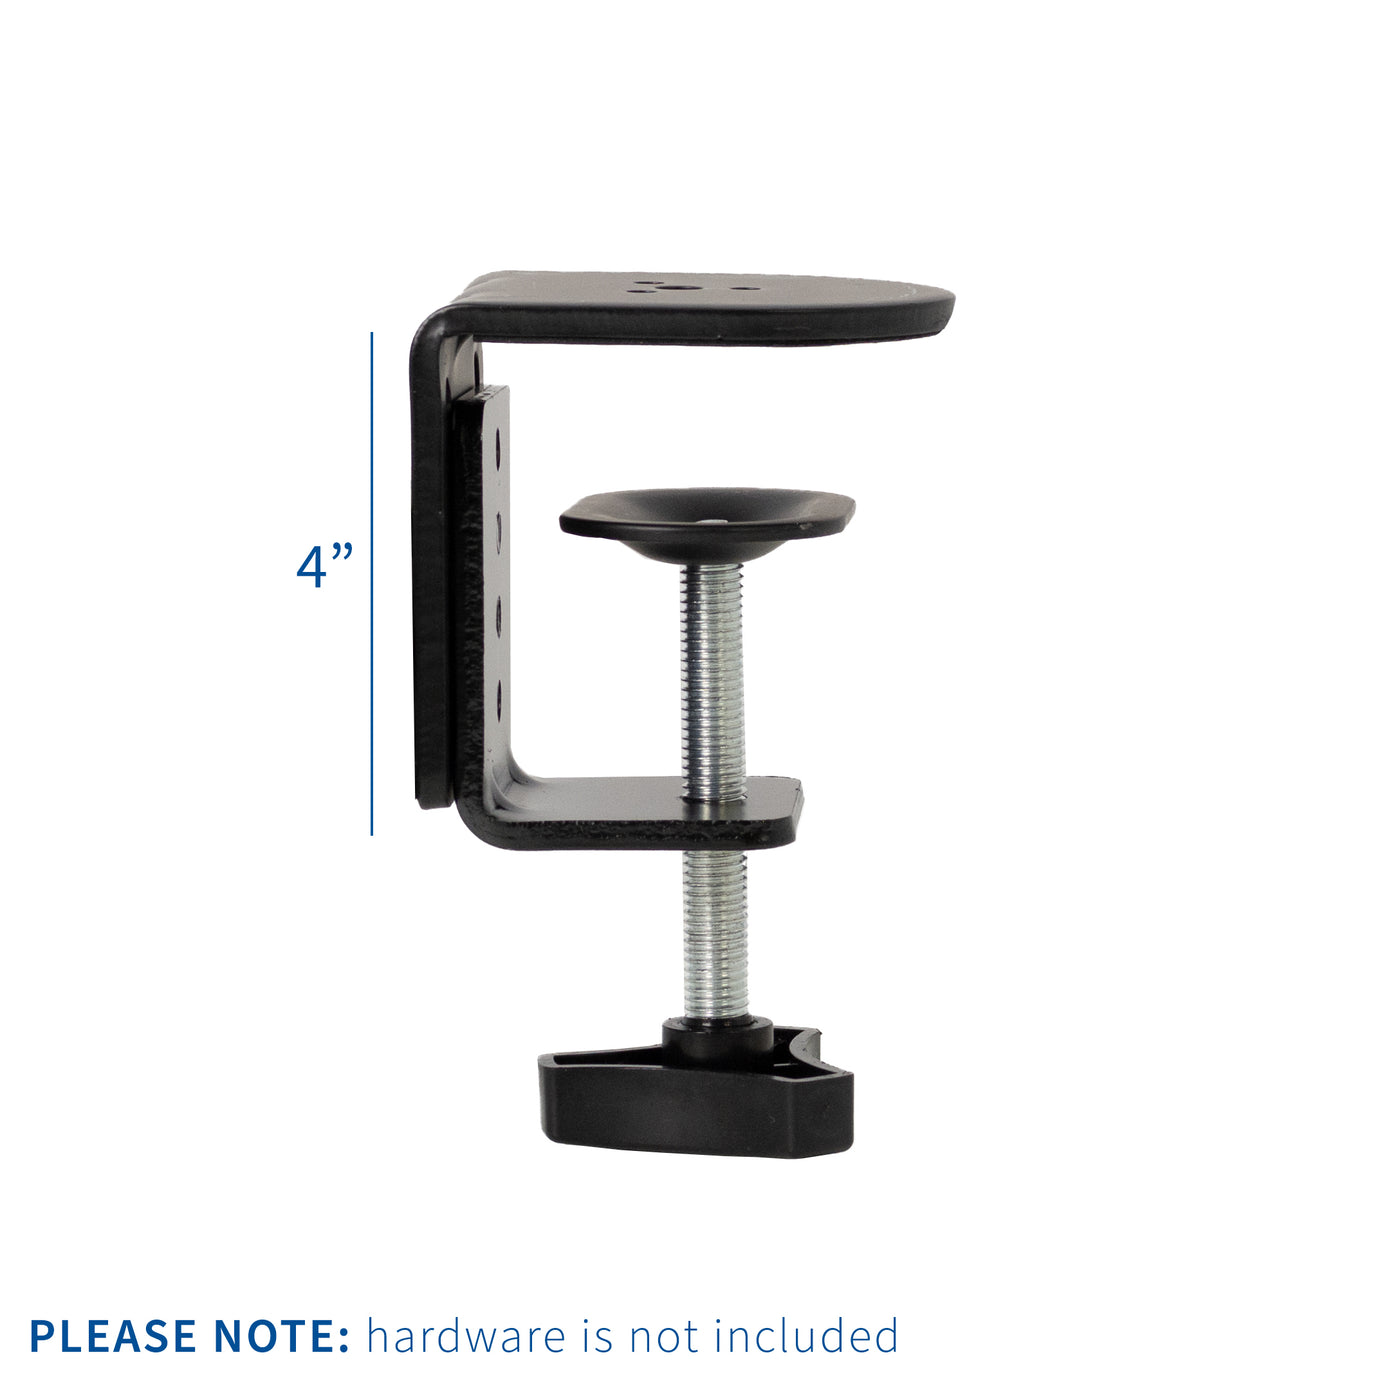 There is no hardware included with this c-clamp mount.